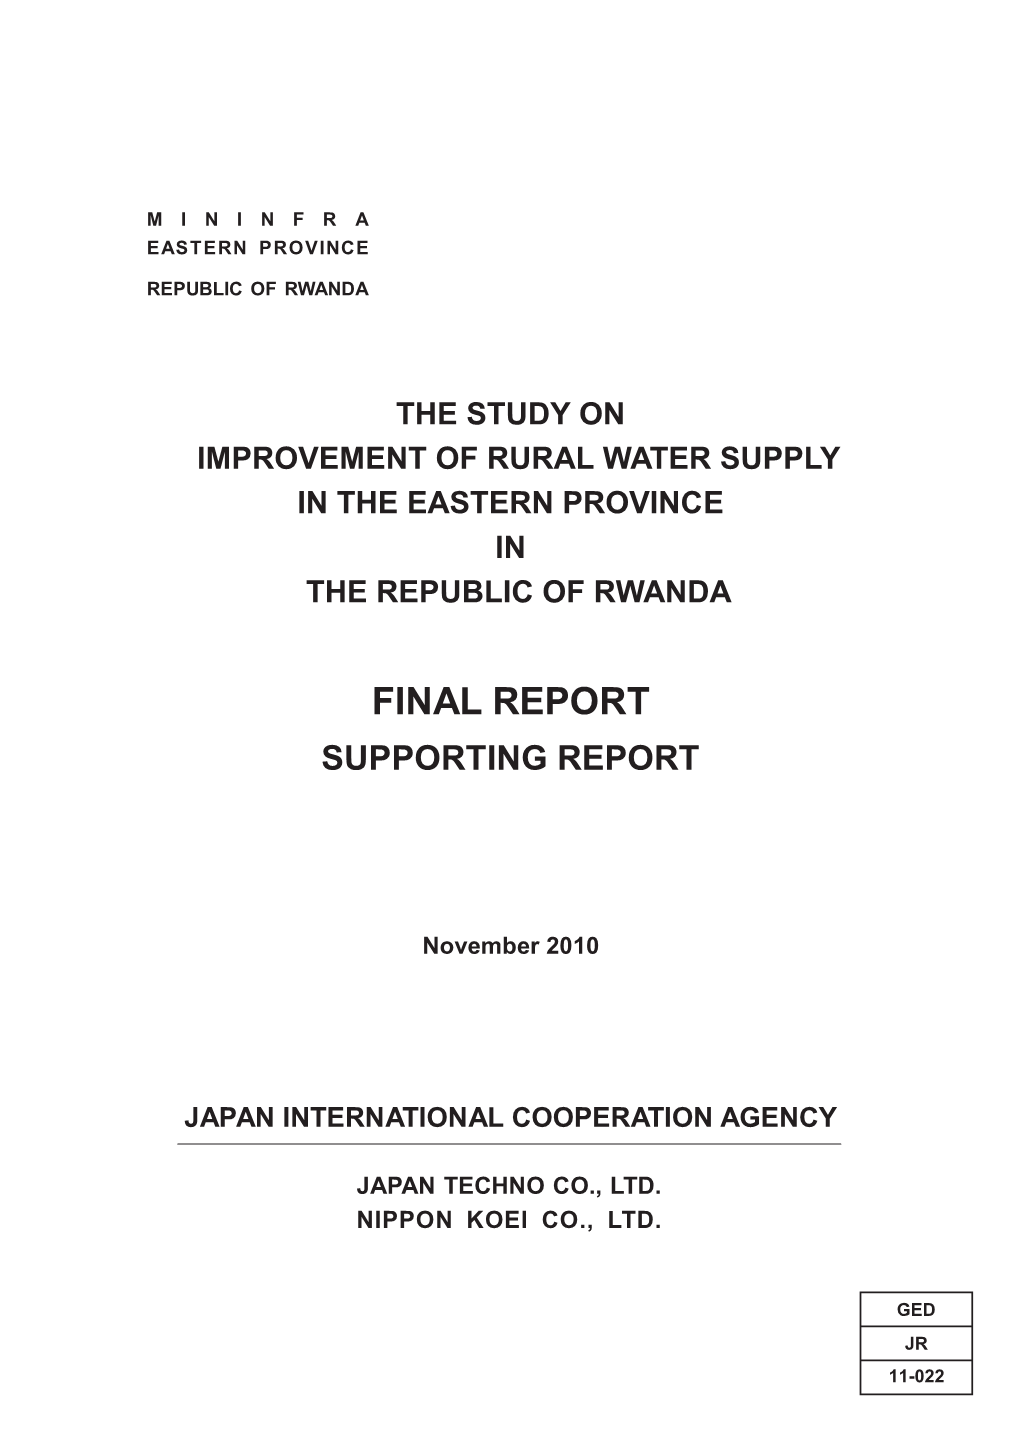 Final Report Supporting Report